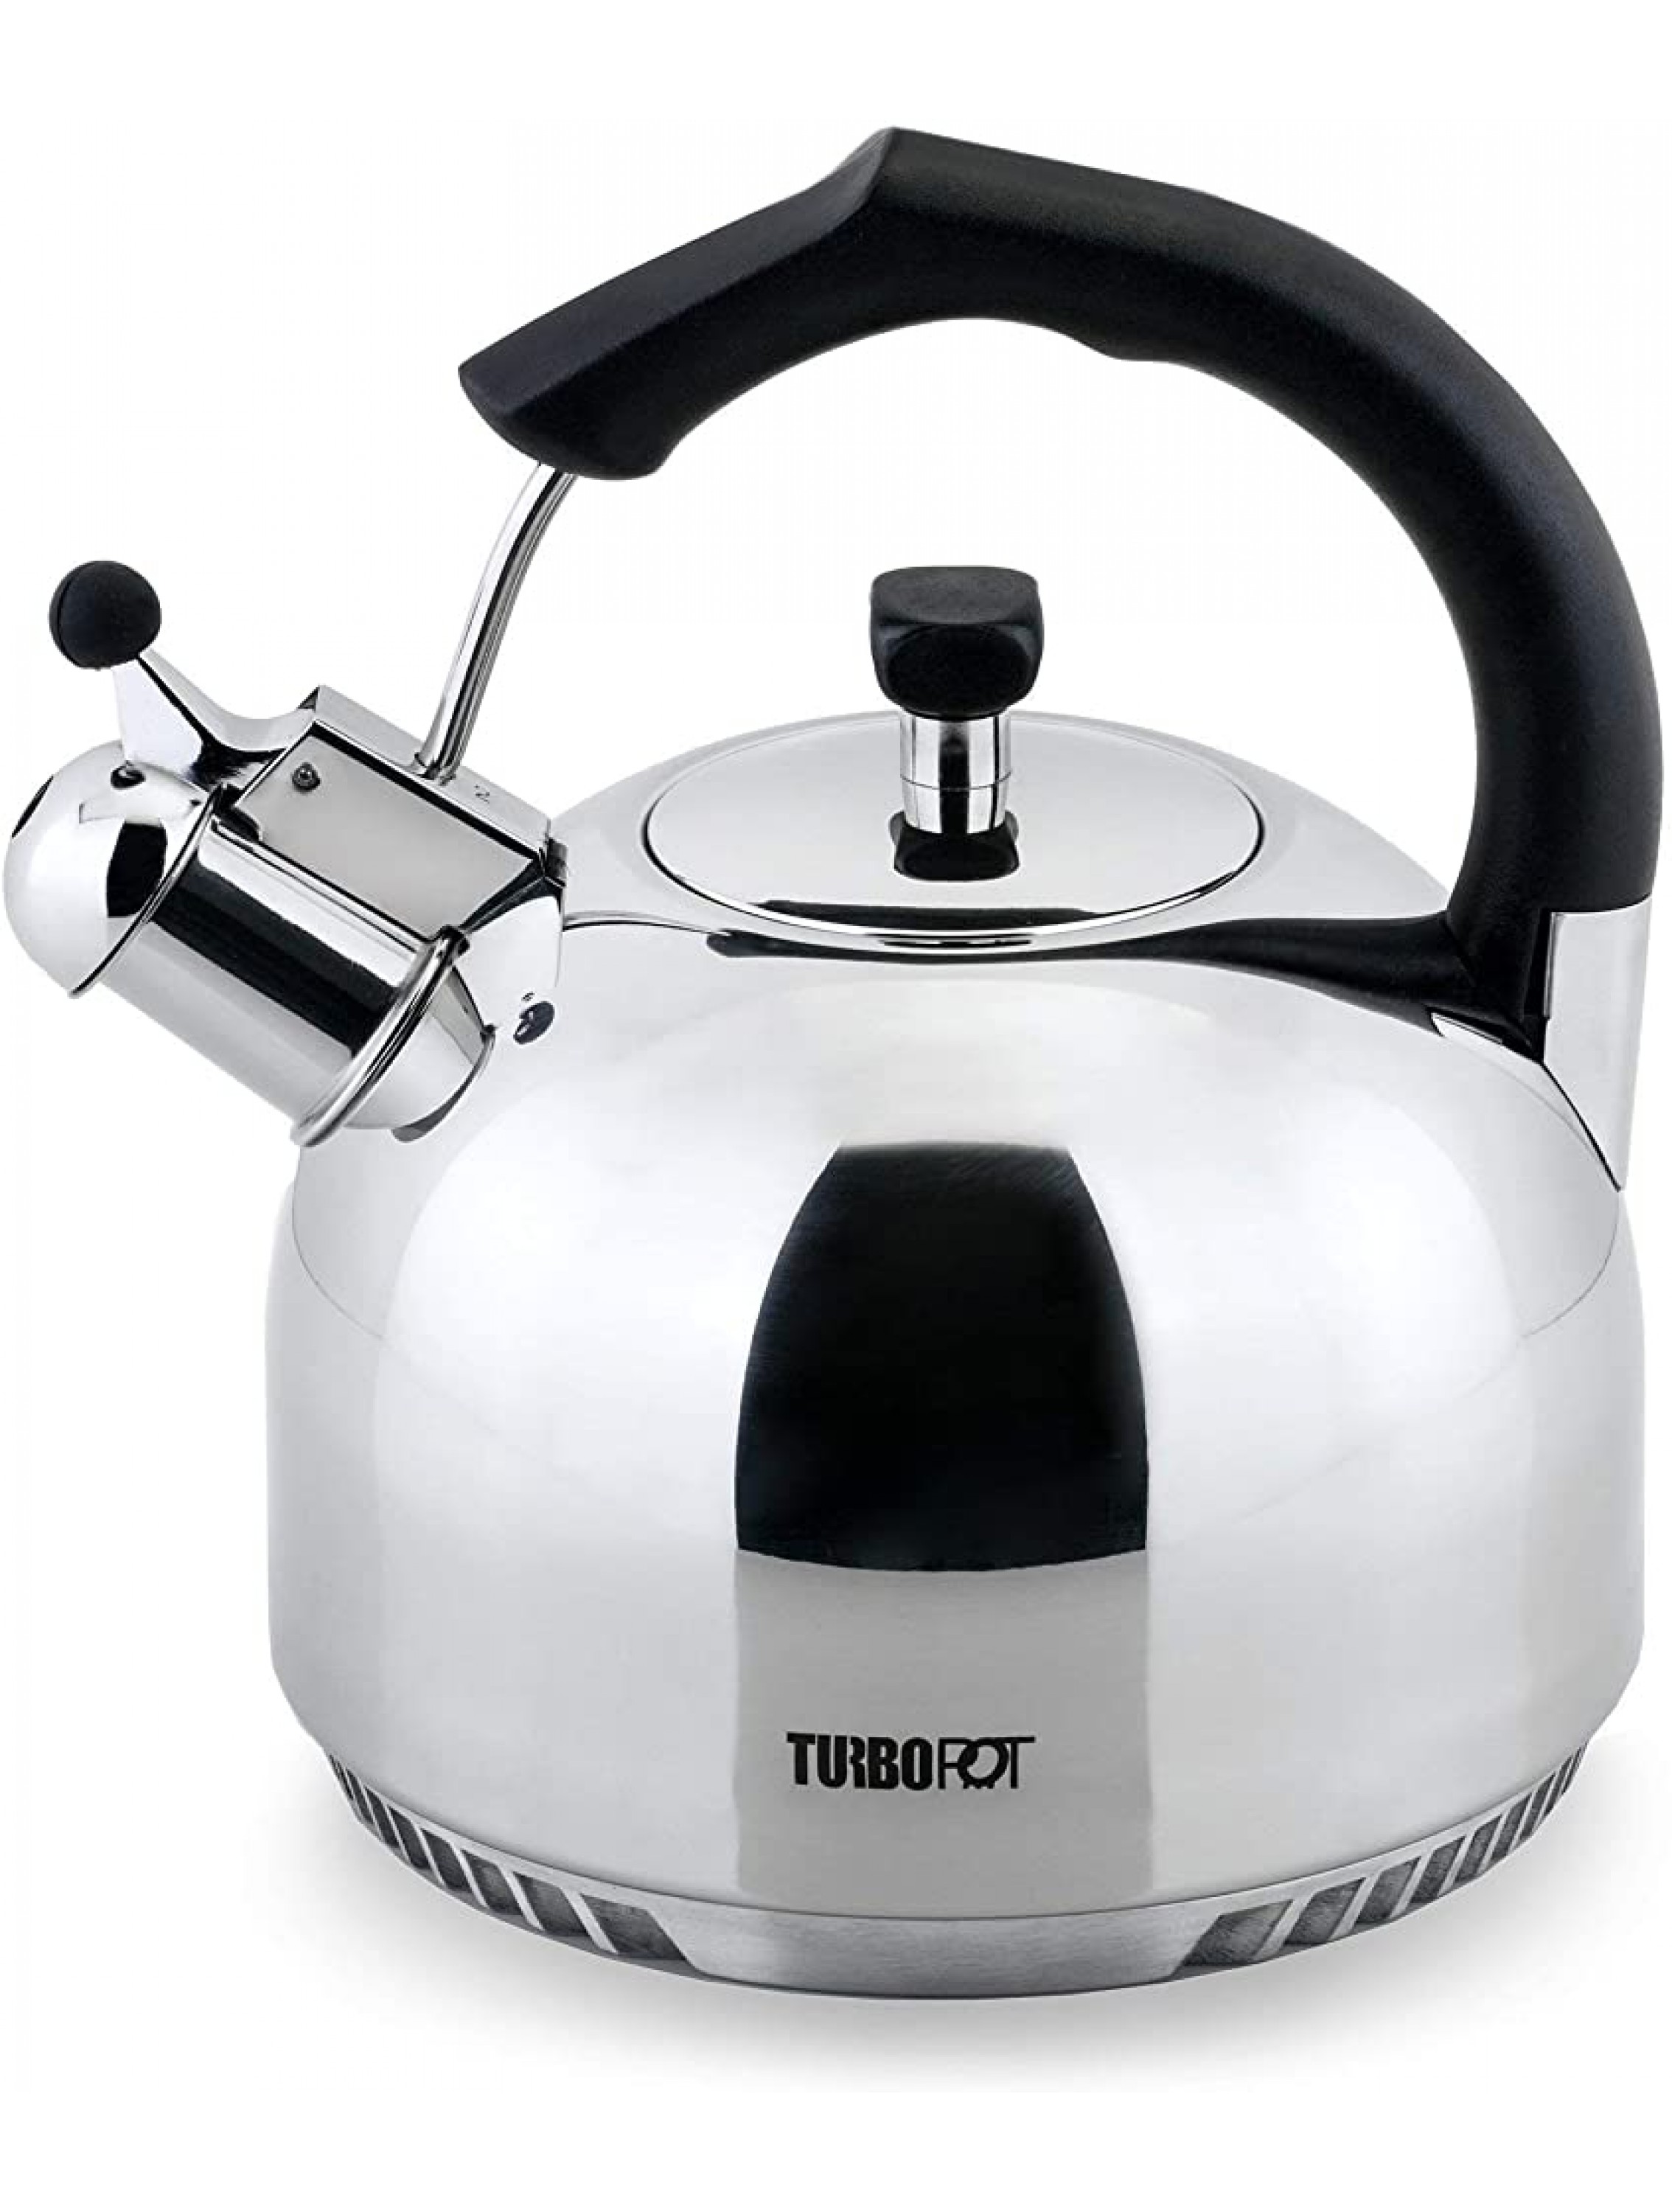 FreshAir™ Rapid Boil Stainless Steel 2.5 qt. Tea Kettle by Turbo Pot® Time-and-Energy Saving Cookware for Gas Stove - BL6LCS9WO